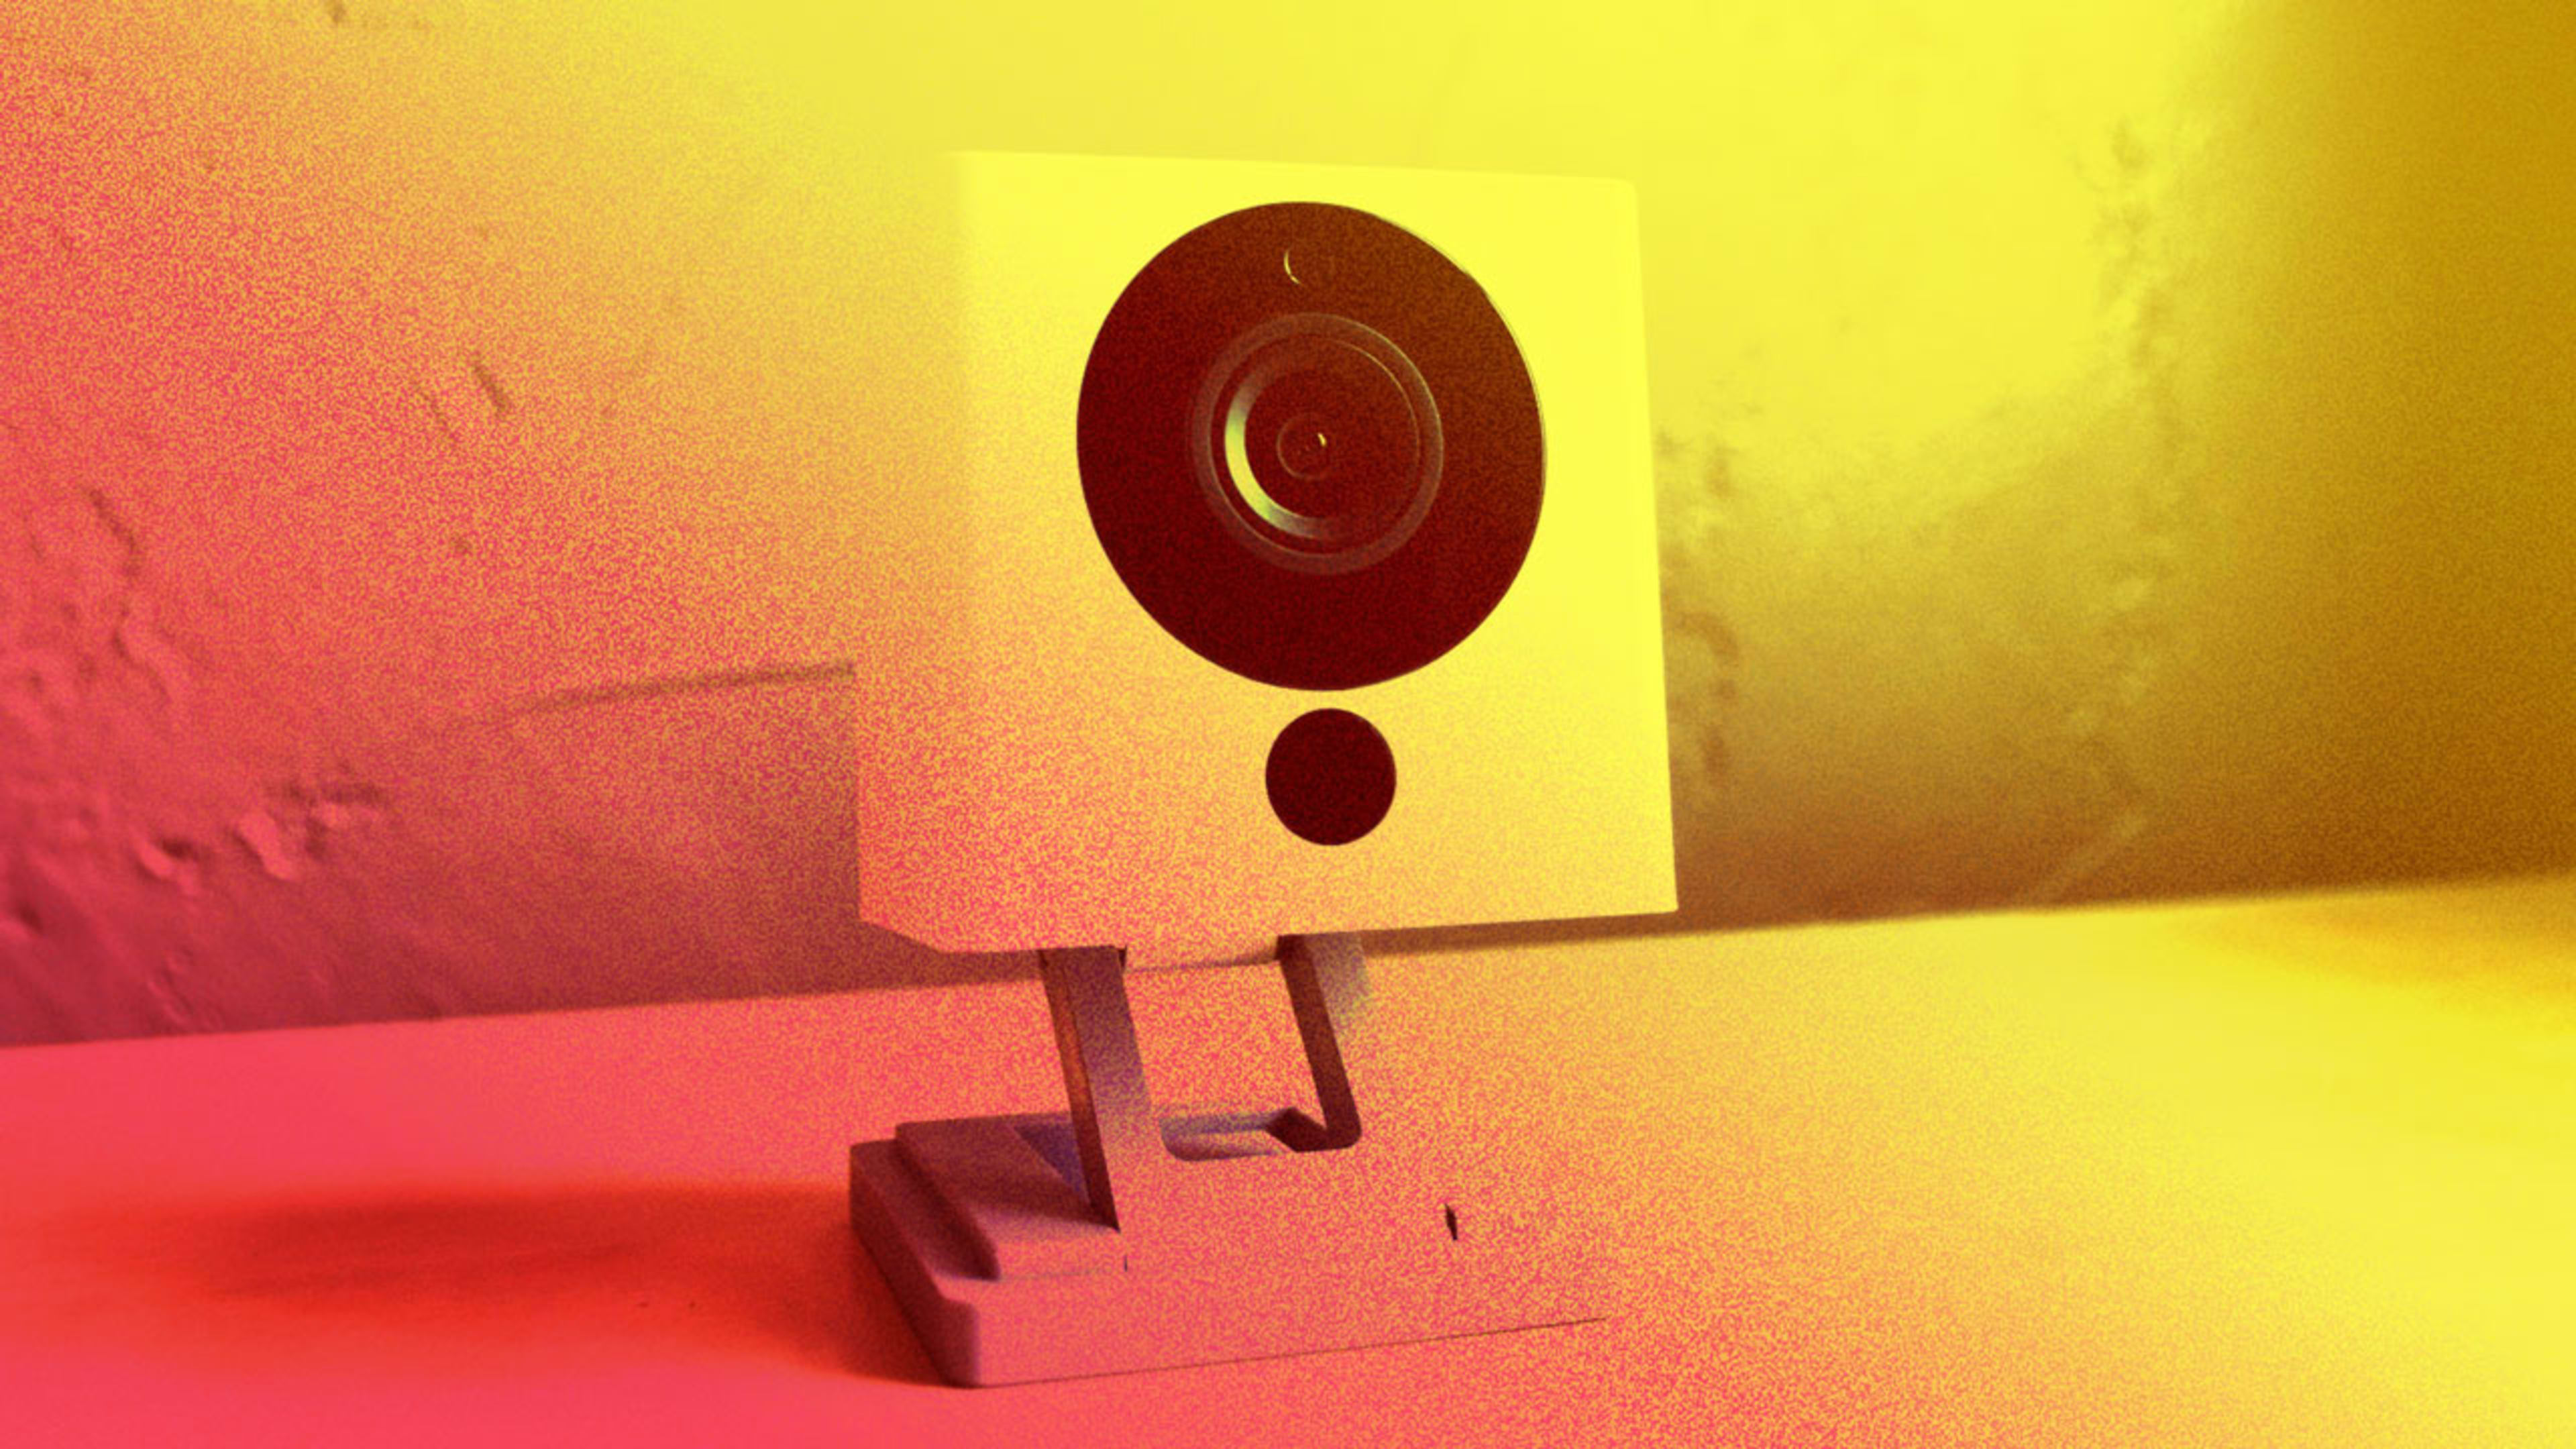 How to find hidden cameras in your Airbnb, and anywhere else